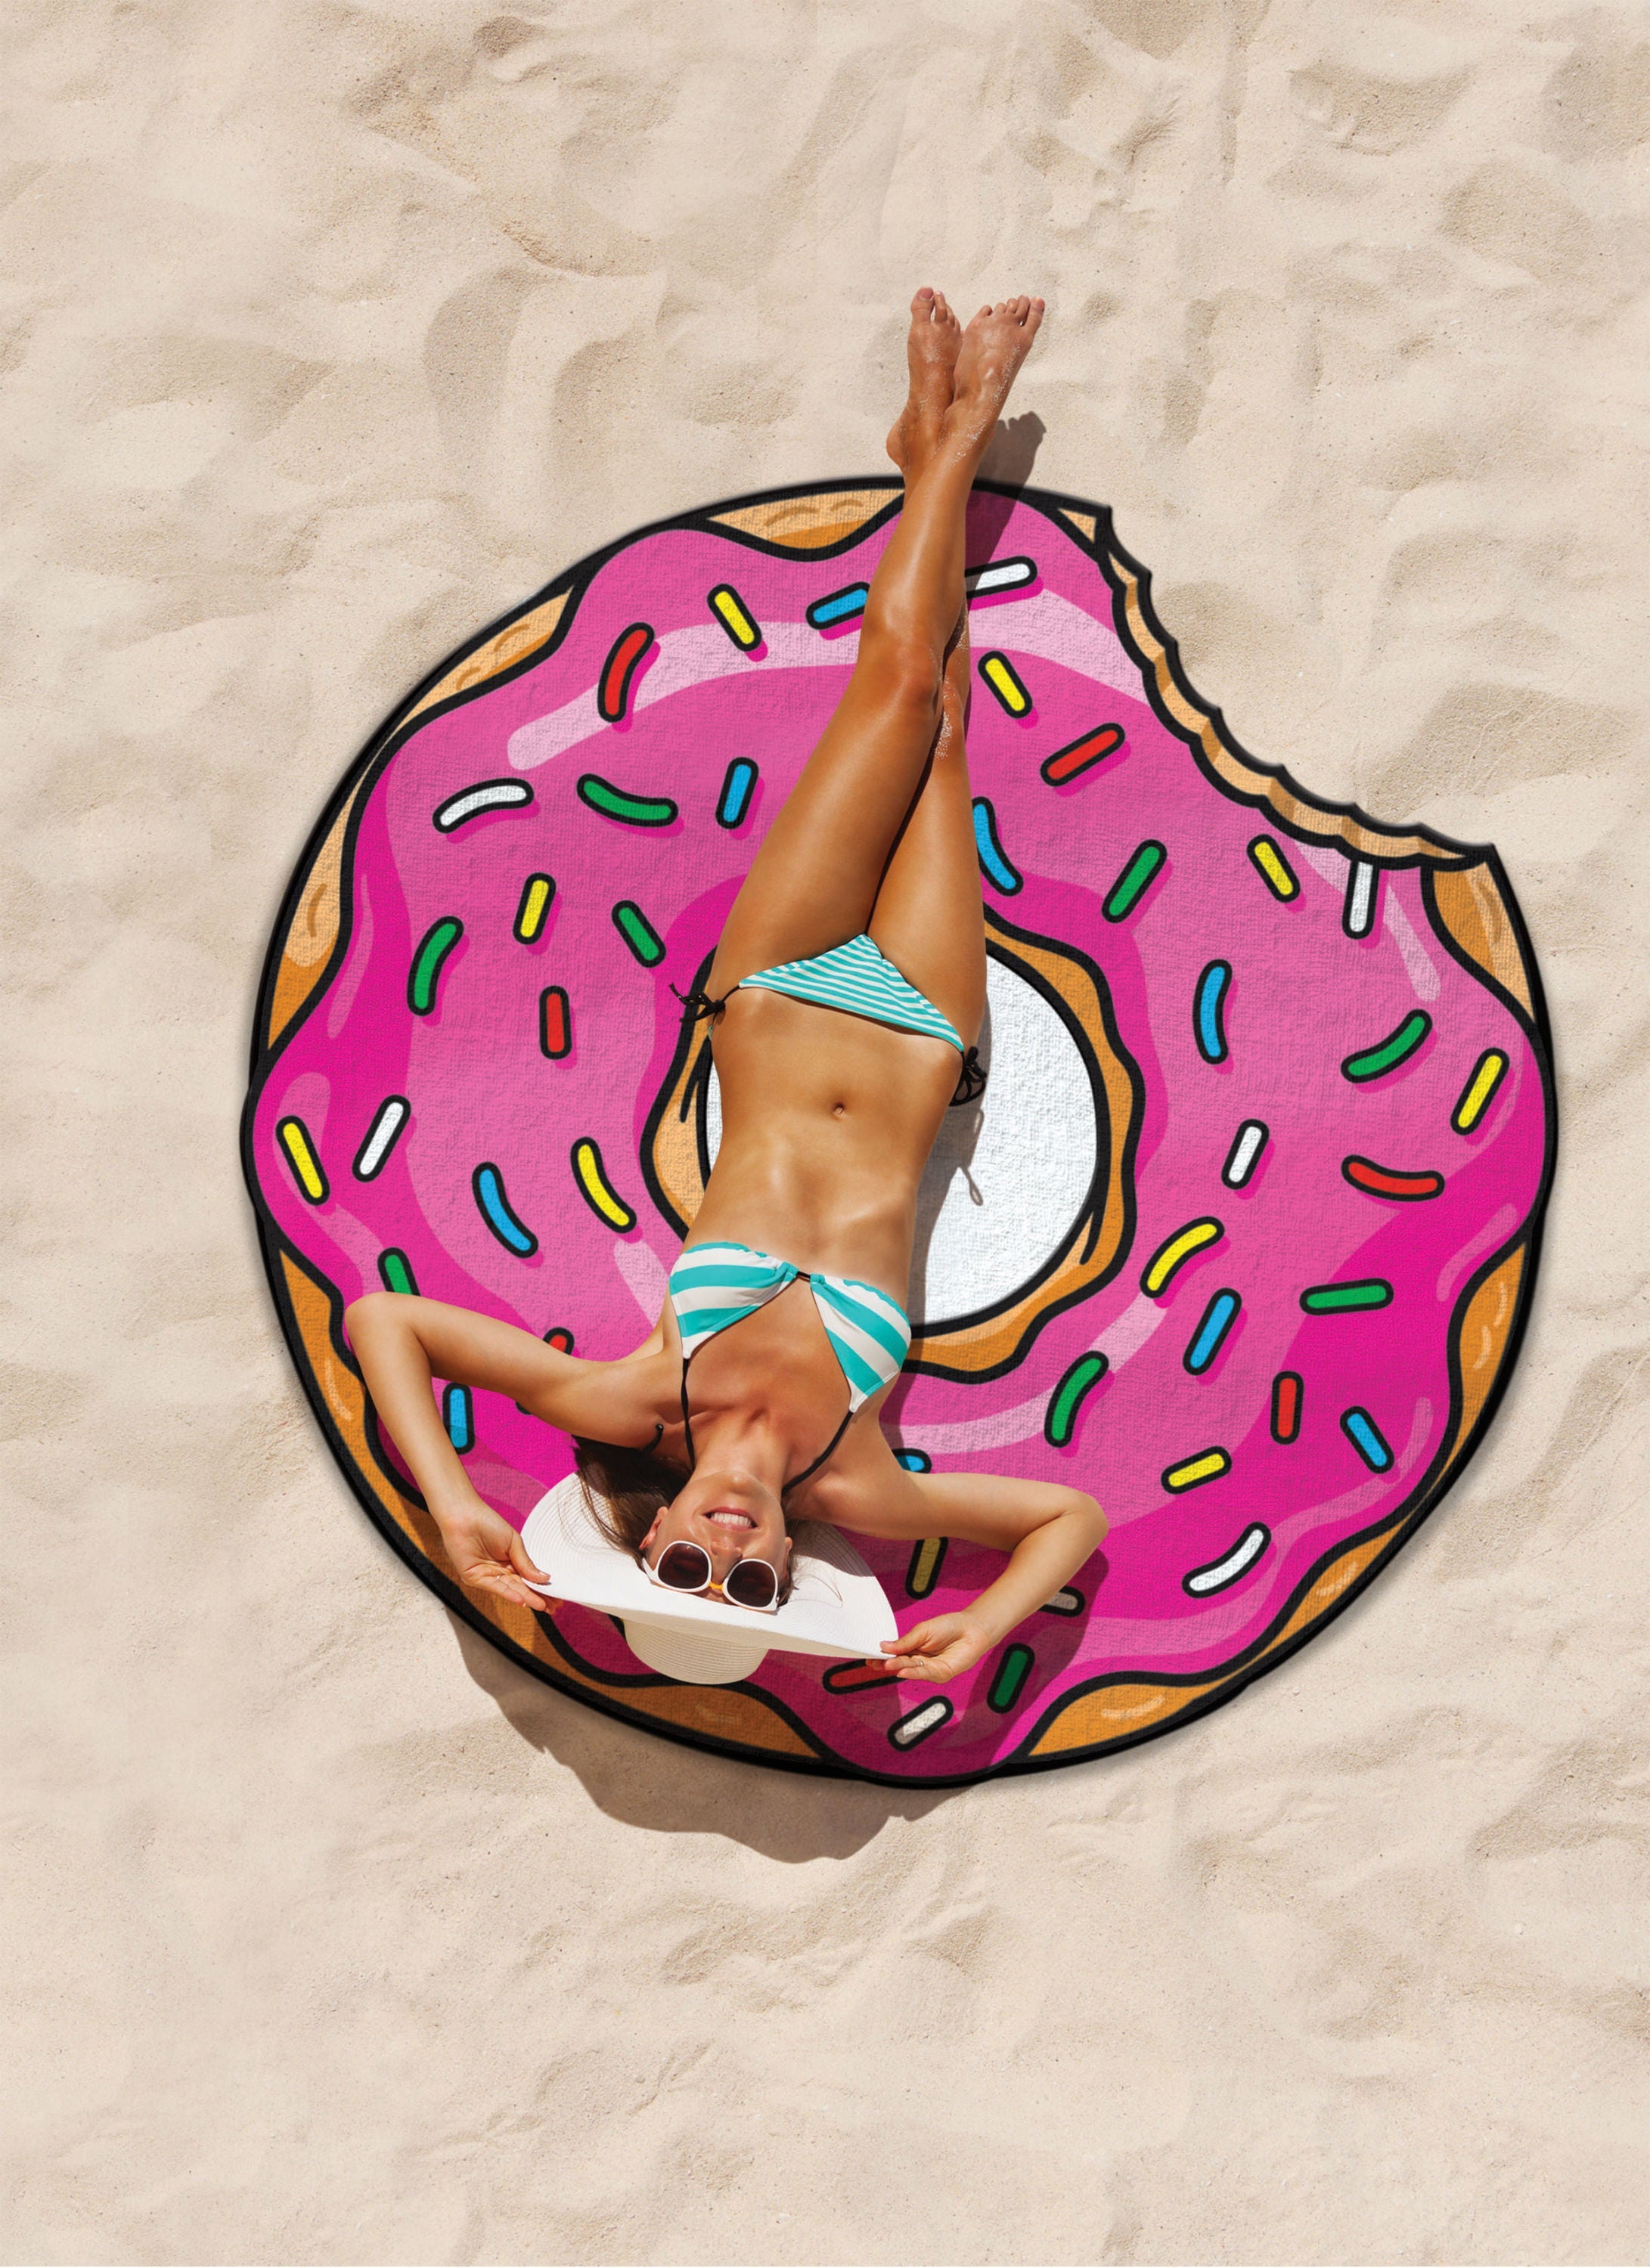 Giant Frosted Donut Beach Blanket